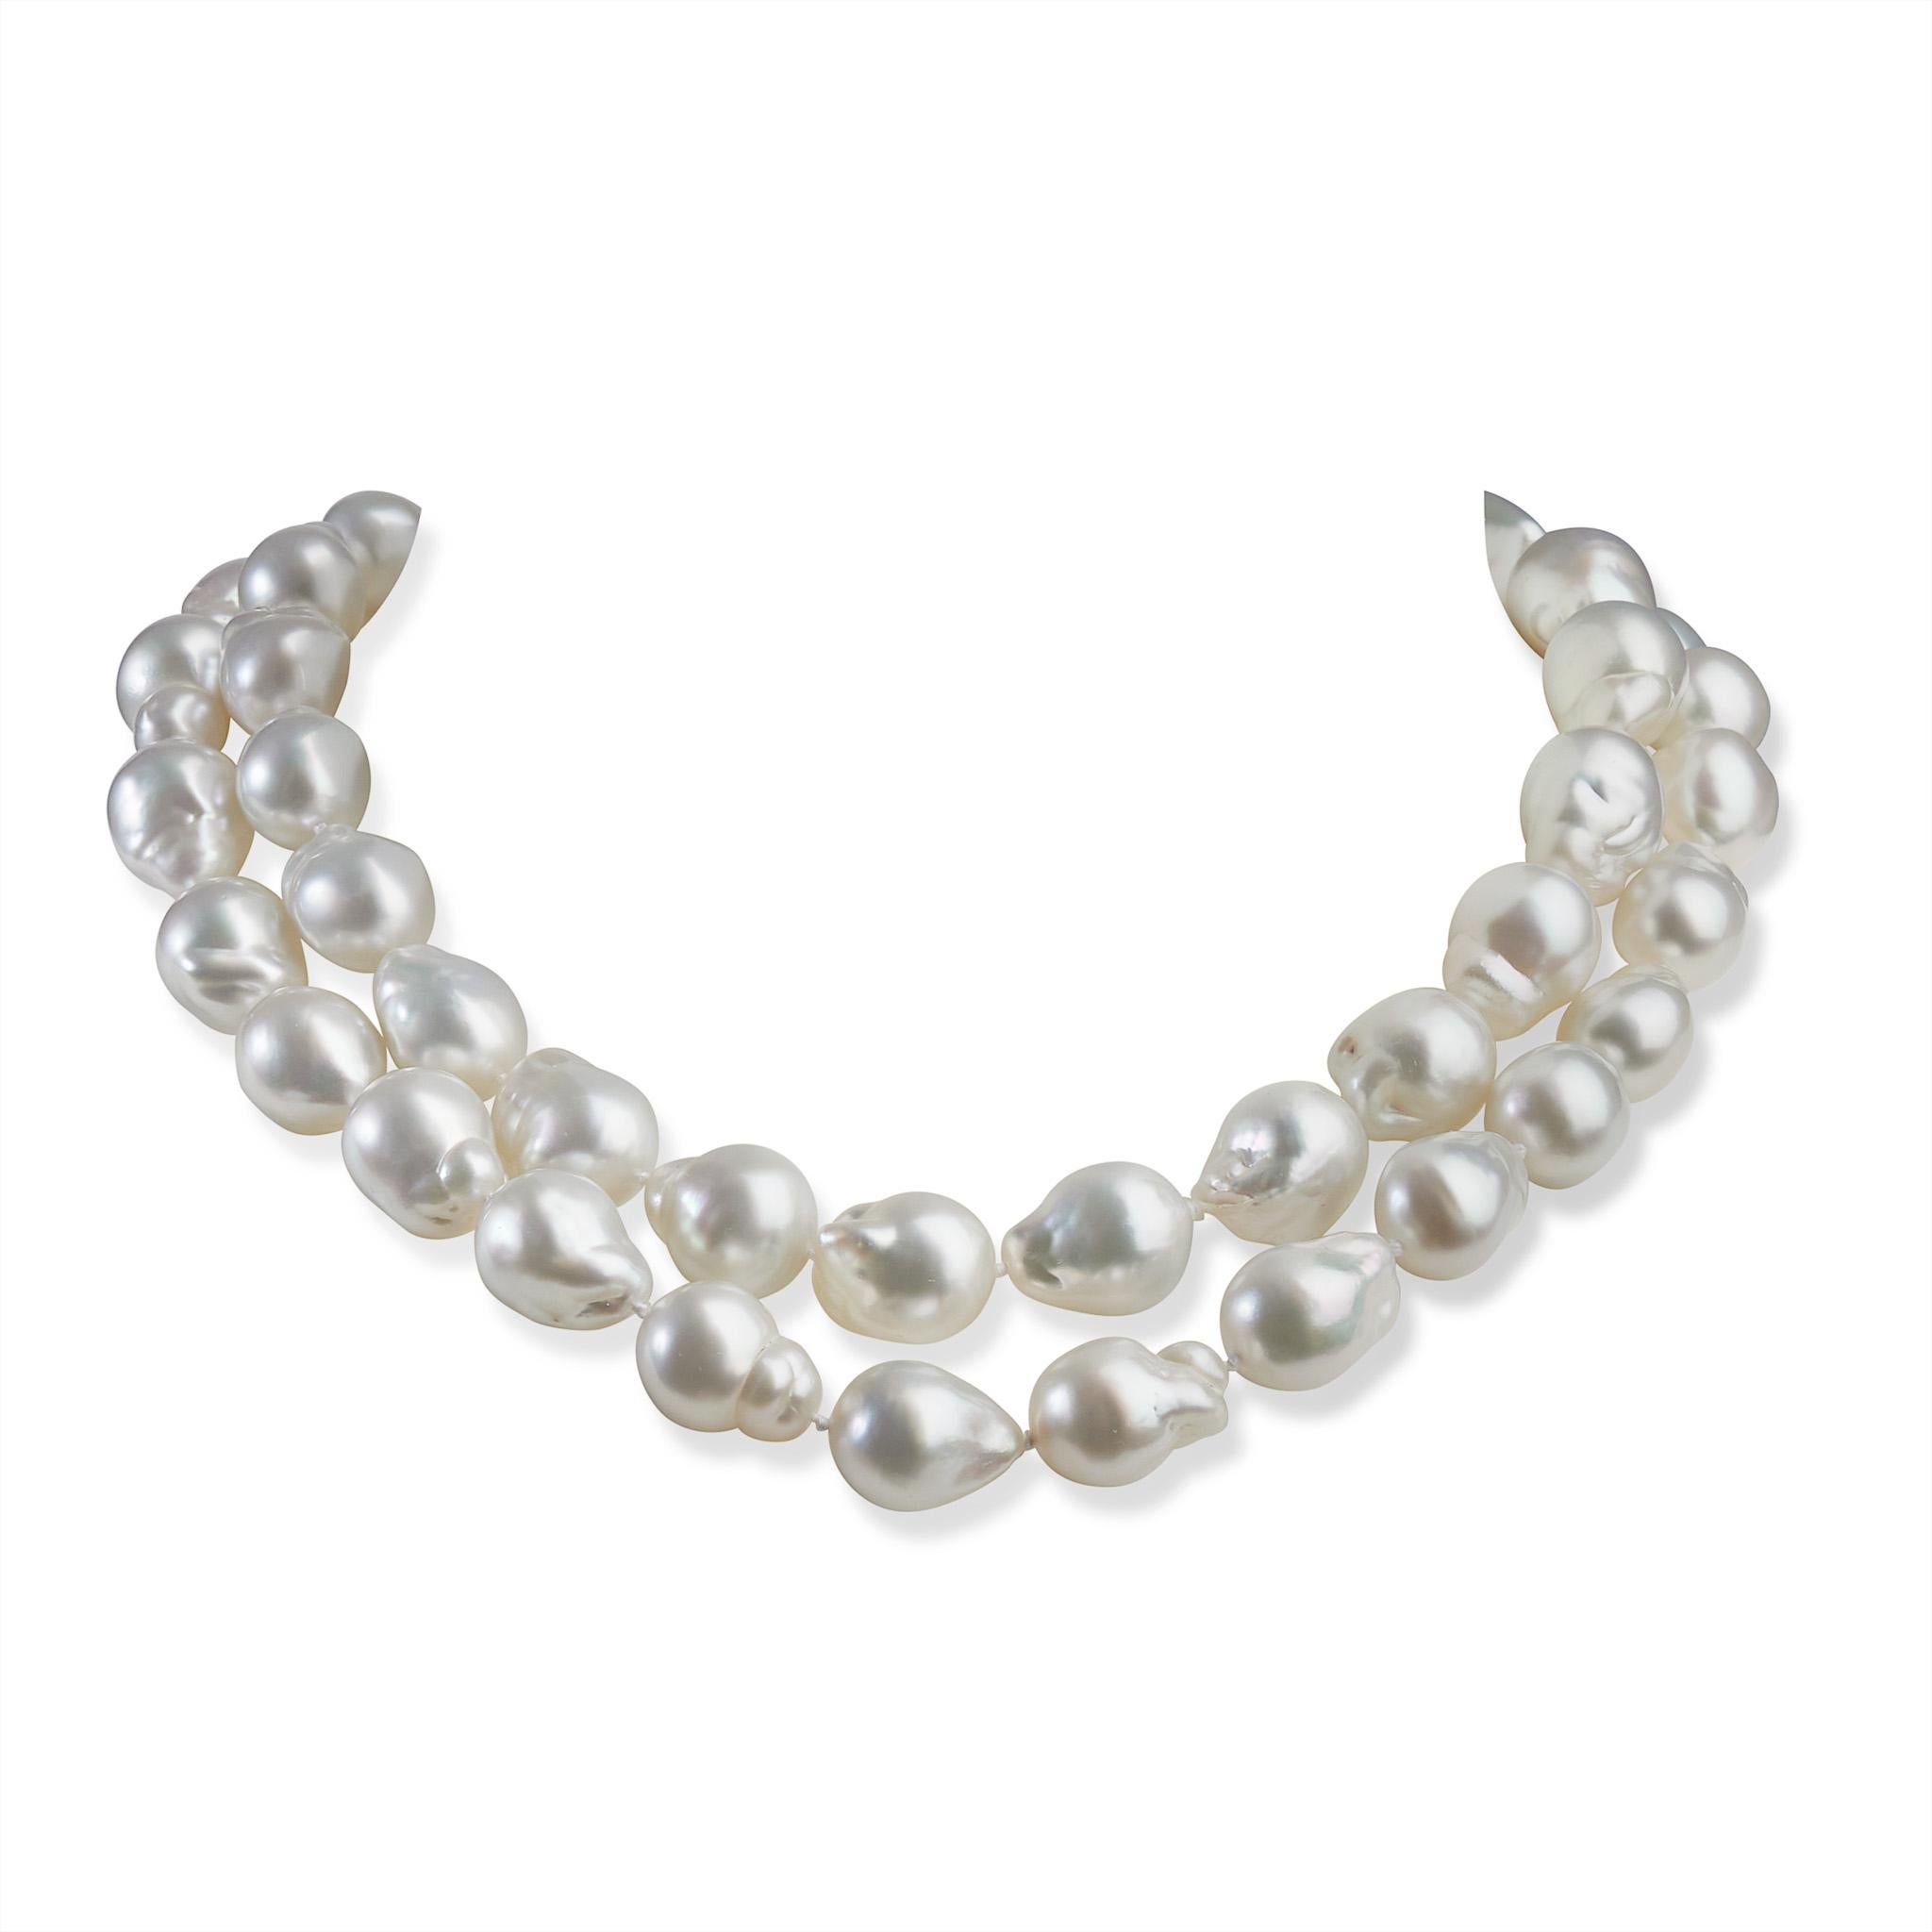 This contemporary necklace is composed of 49 cultured white natural color south sea baroque pearls measuring approximately 16.00 x 13.00mm. The strand of white pearls with silvery-rose tones is completed by a baroque pearl shaped 18K white gold